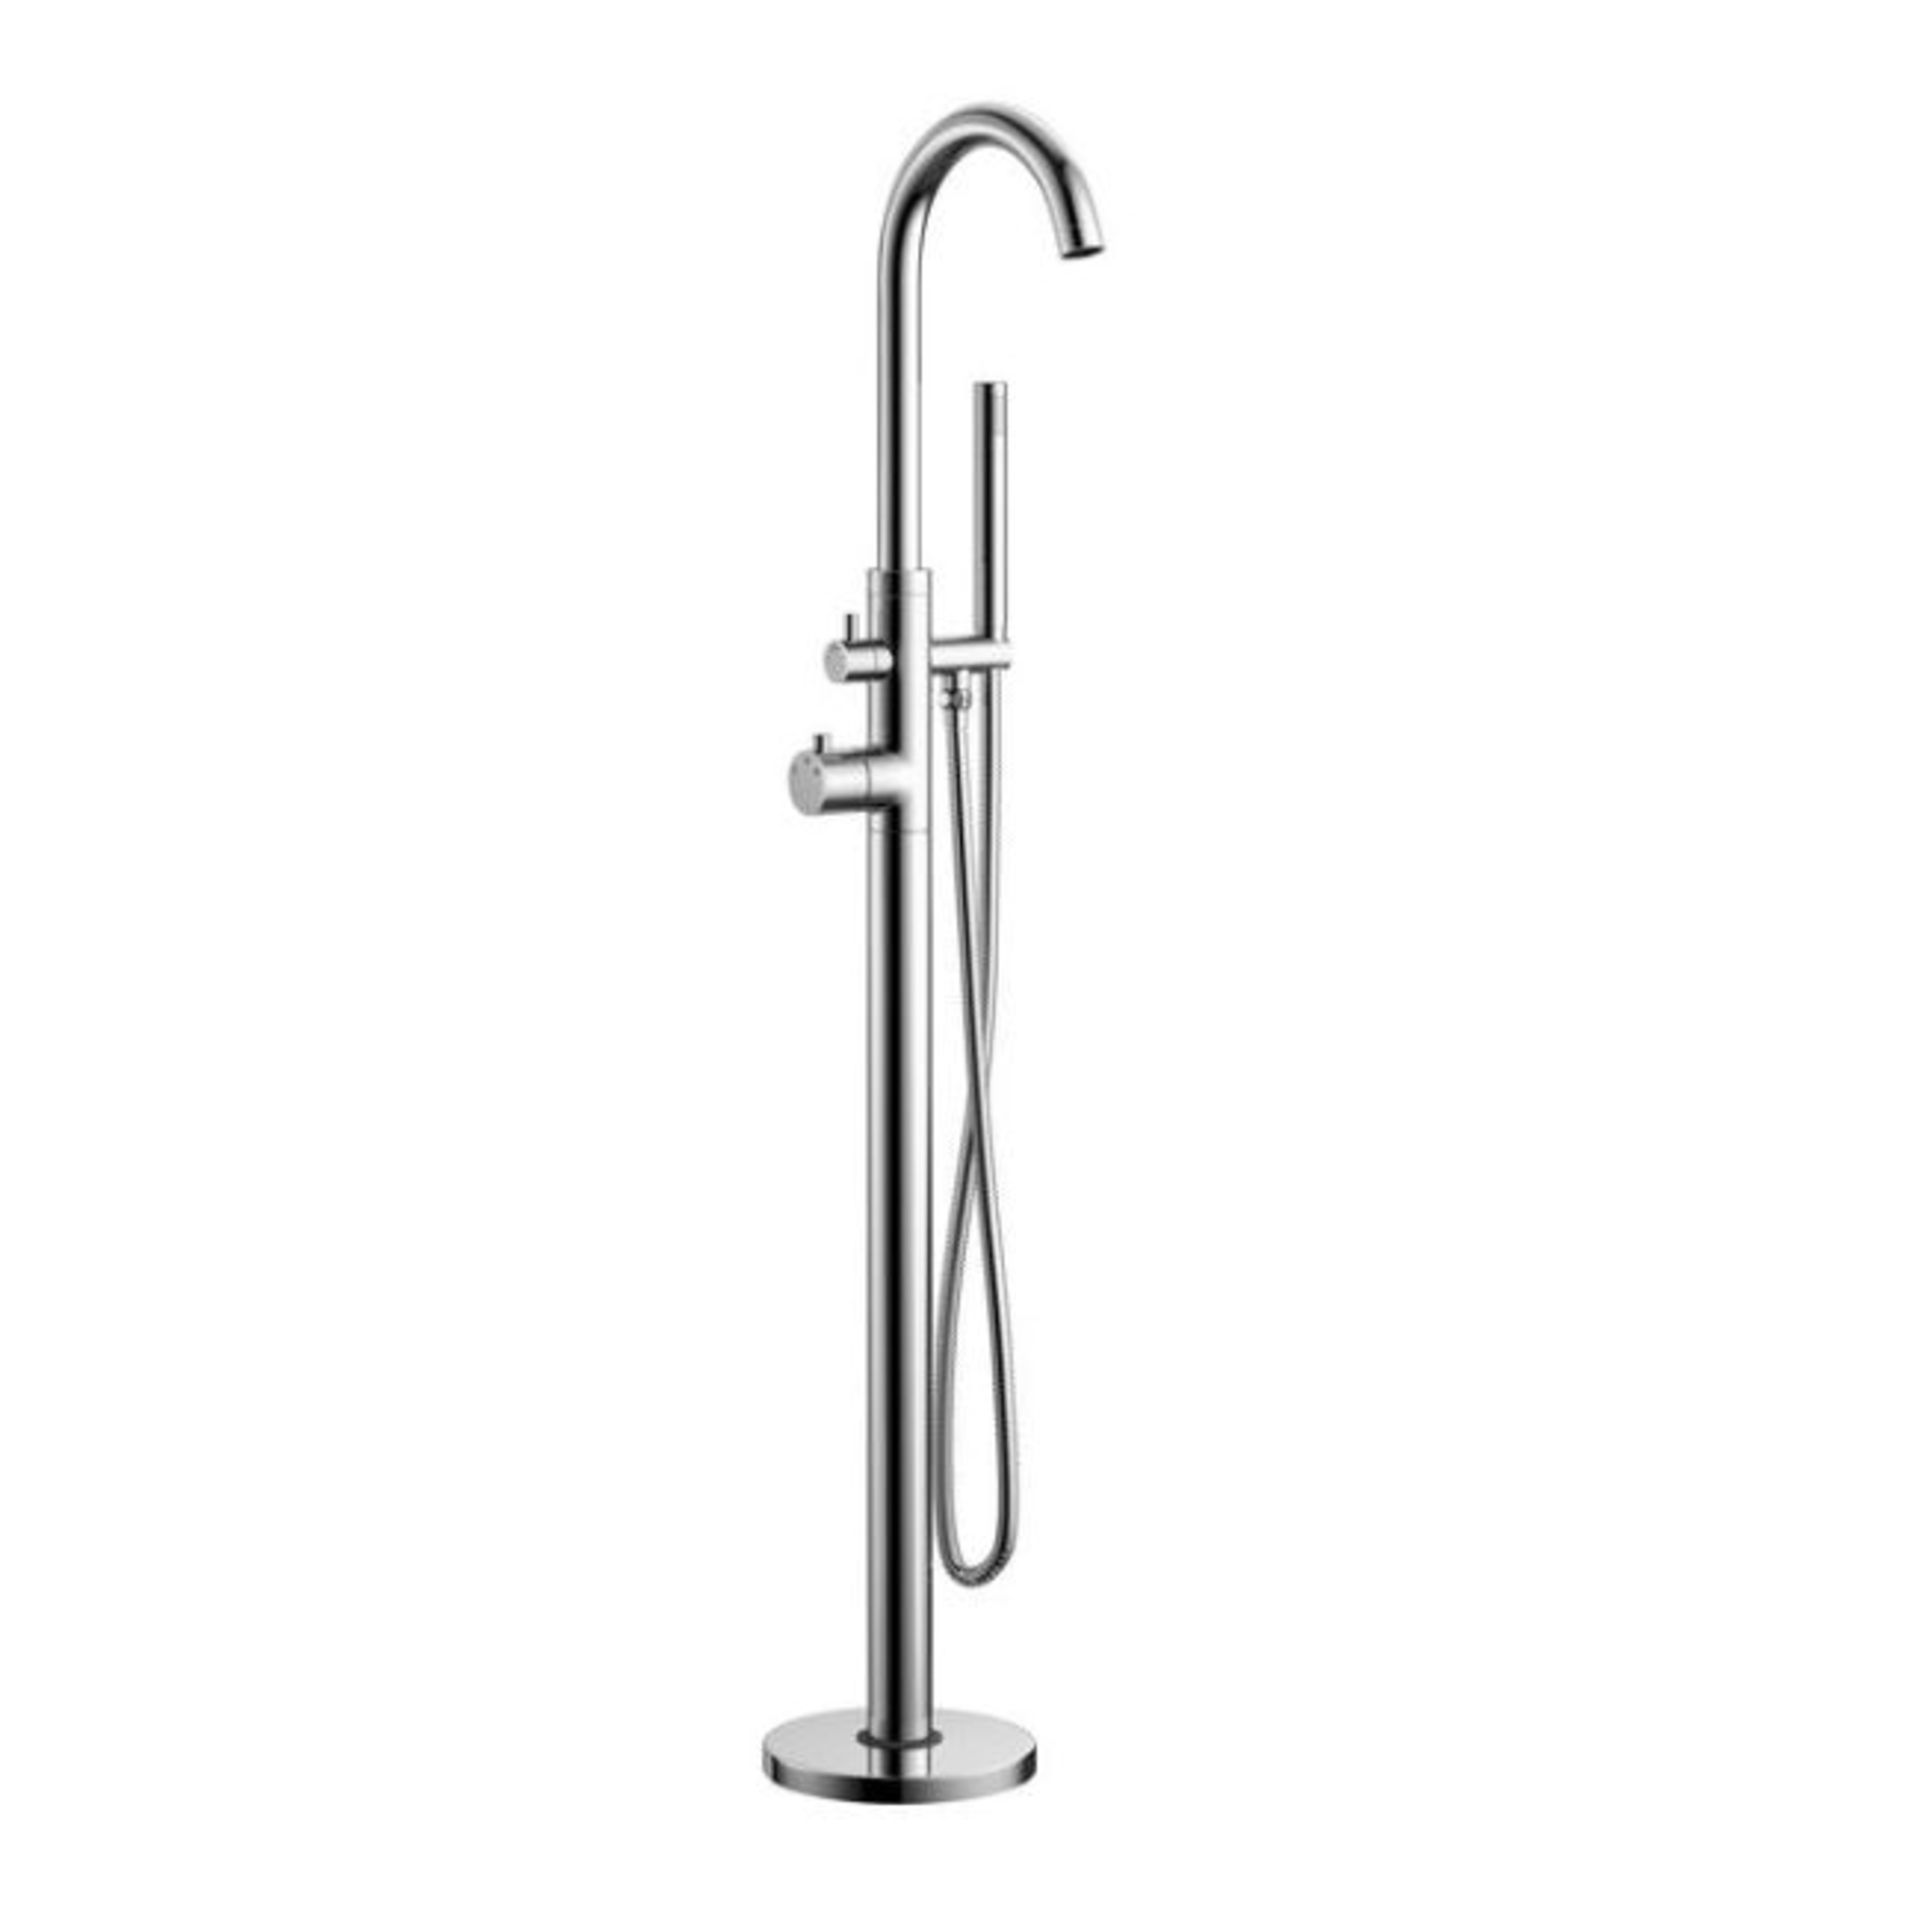 New Gladstone Freestanding Thermostatic Bath Mixer Tap With Hand Held Shower Head. Tb3017.Chro... - Image 2 of 2